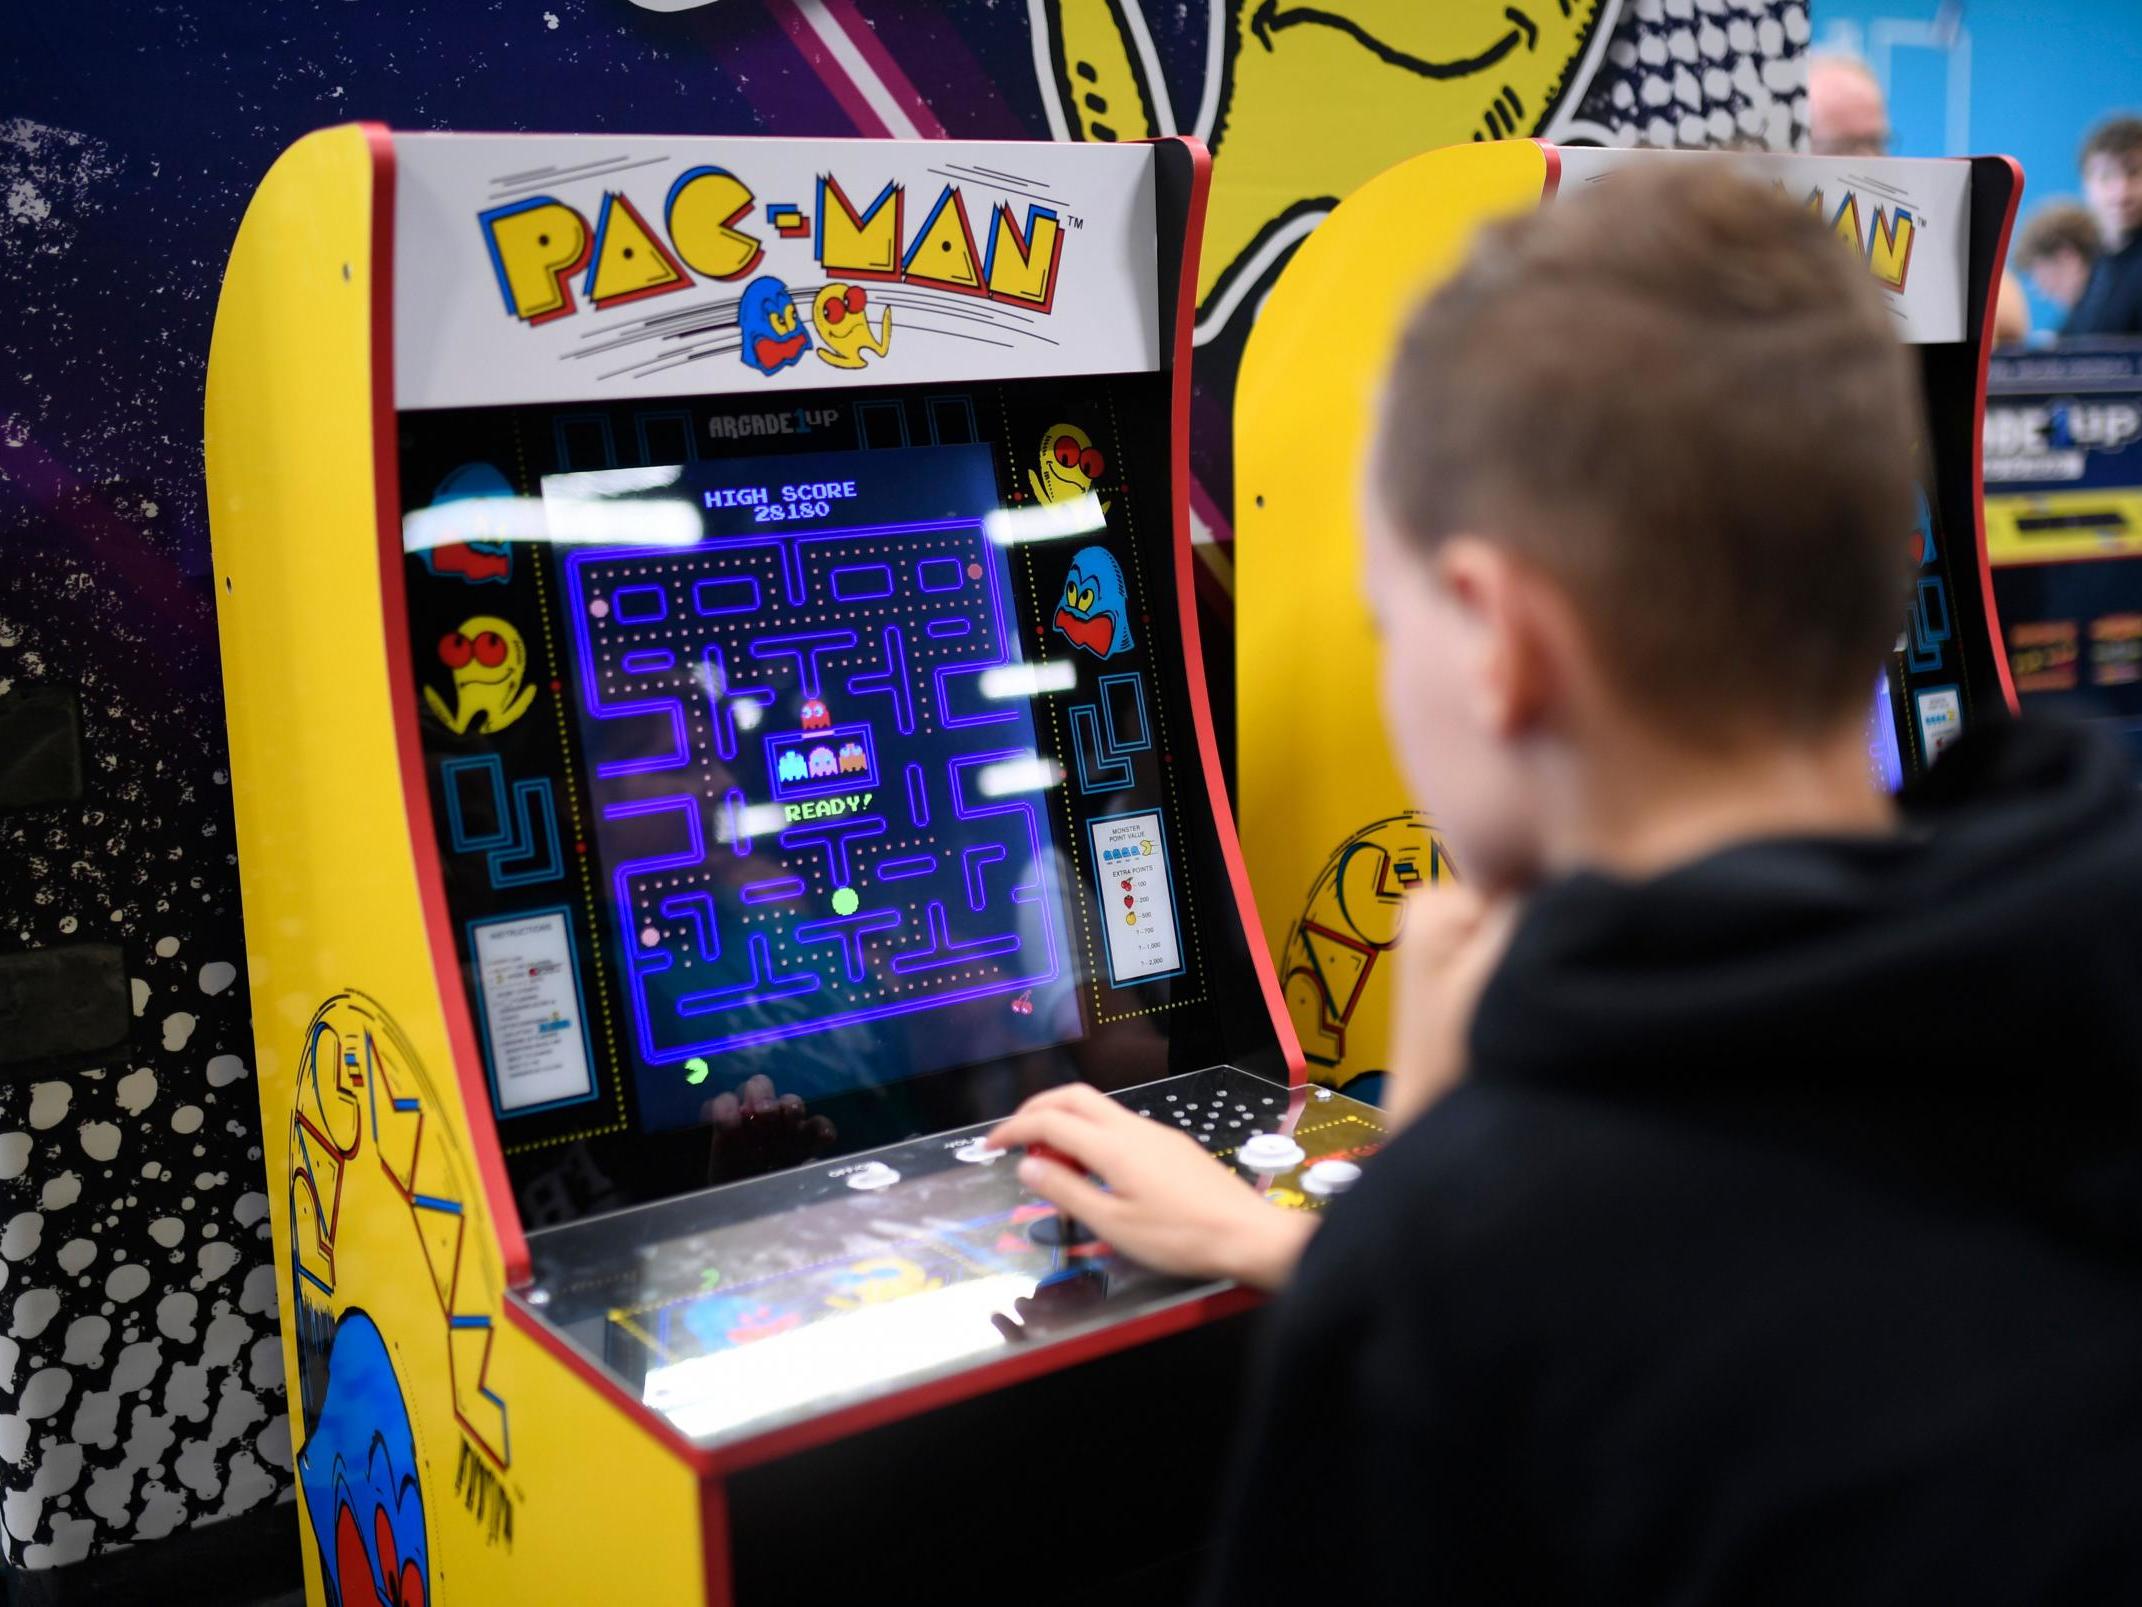 'Pacman' was released by Namco on 22 May 1980, and remains one of the most popular games of all time